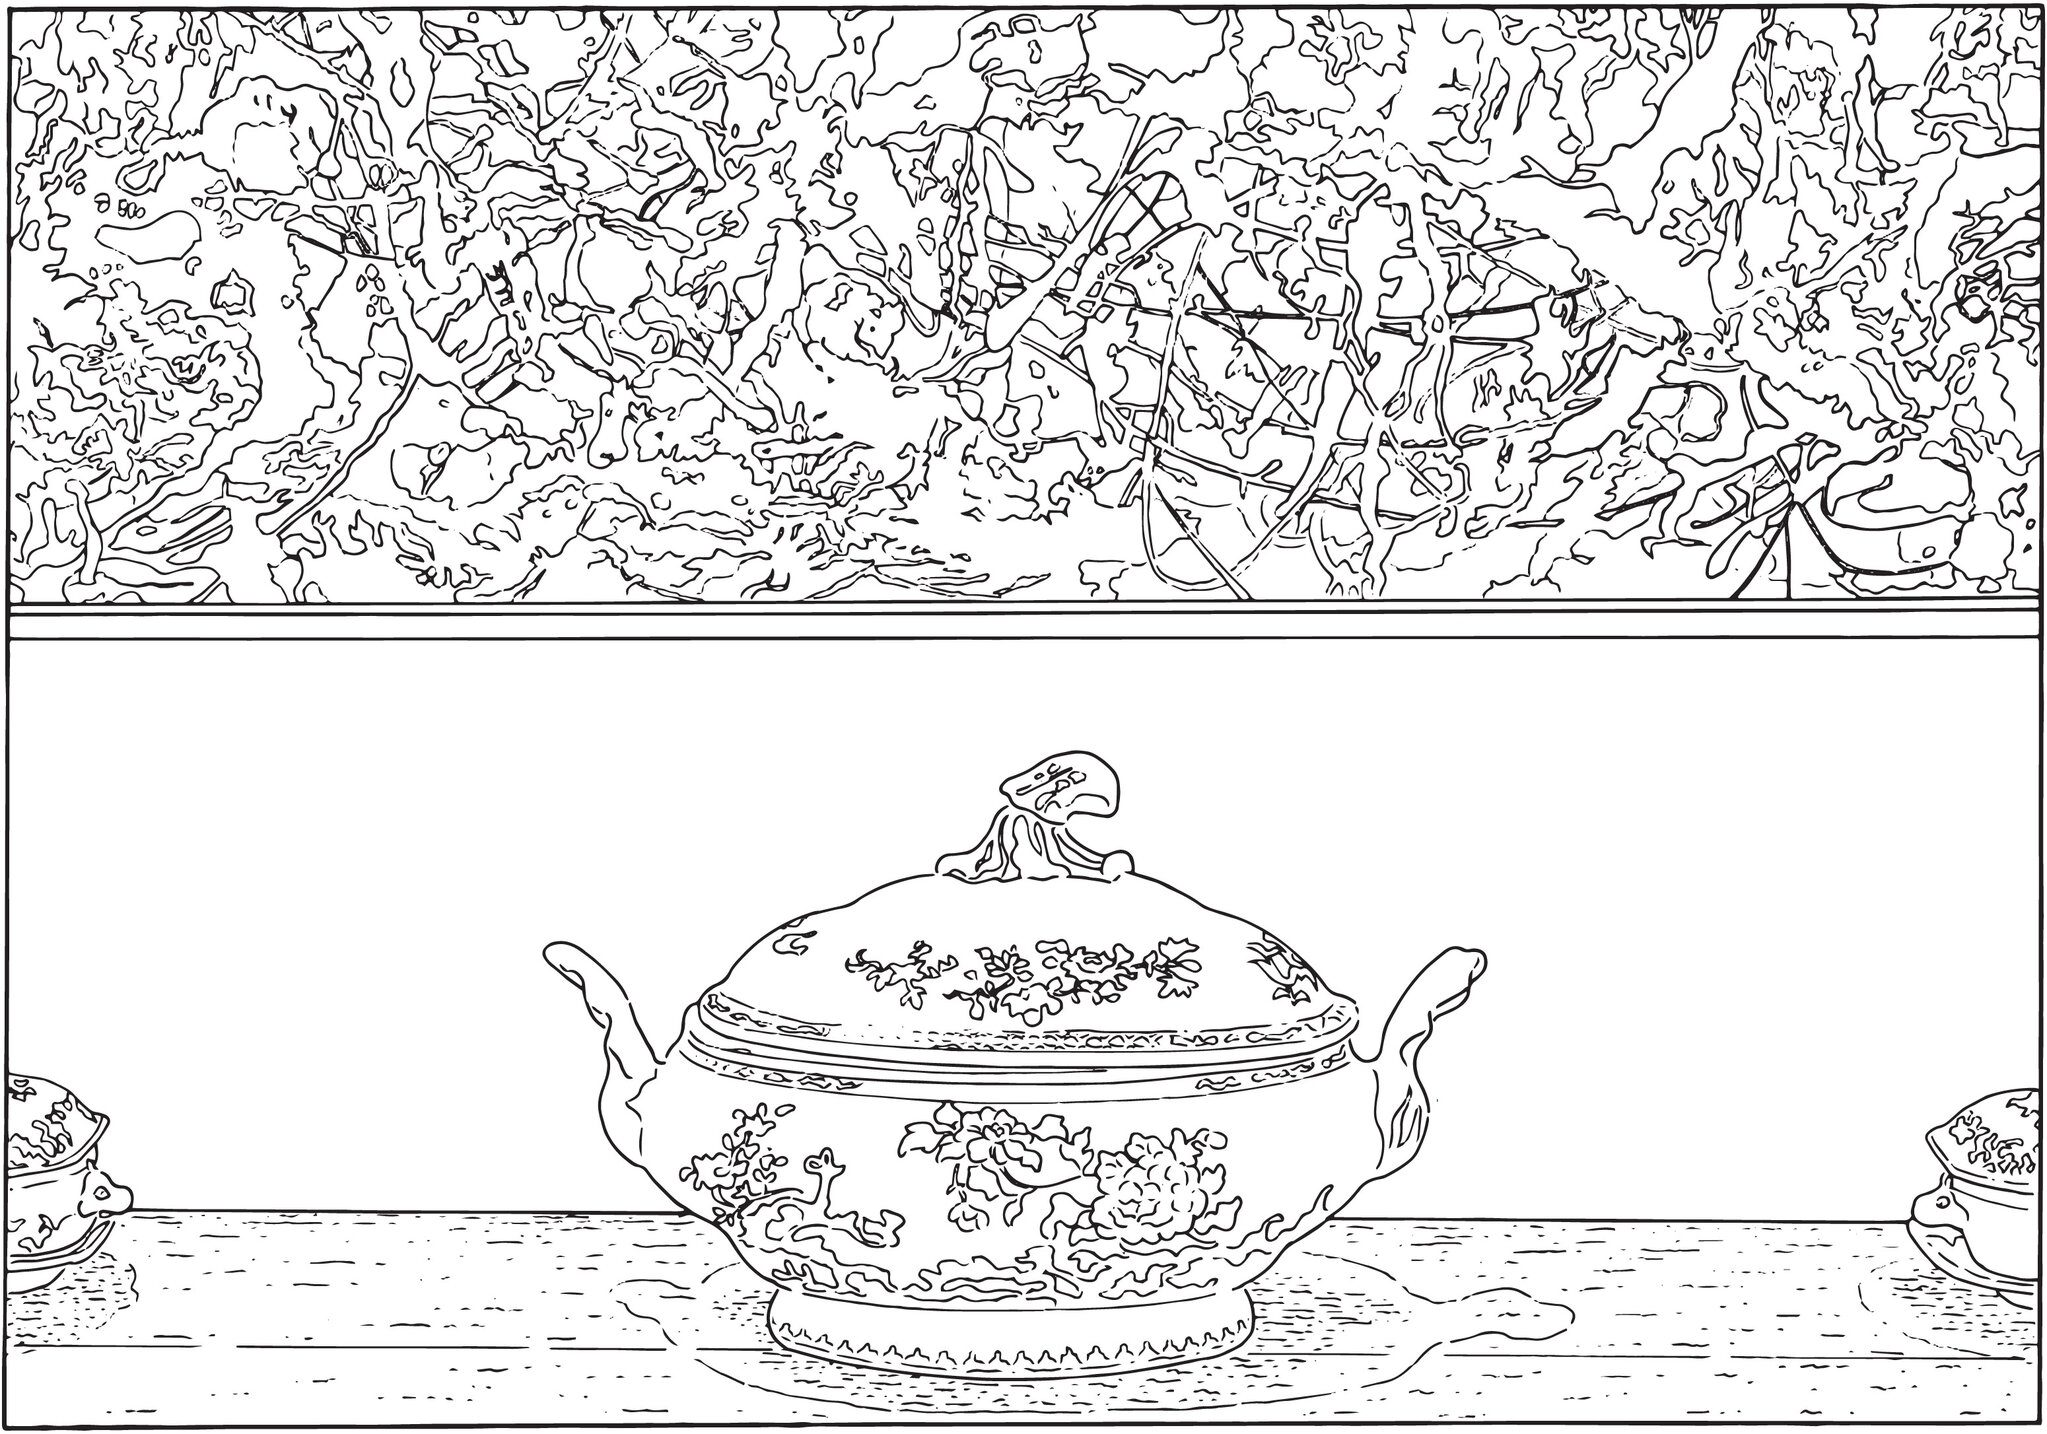 Louise Lawler, "Pollock and Tureen (traced)", 2013/1984